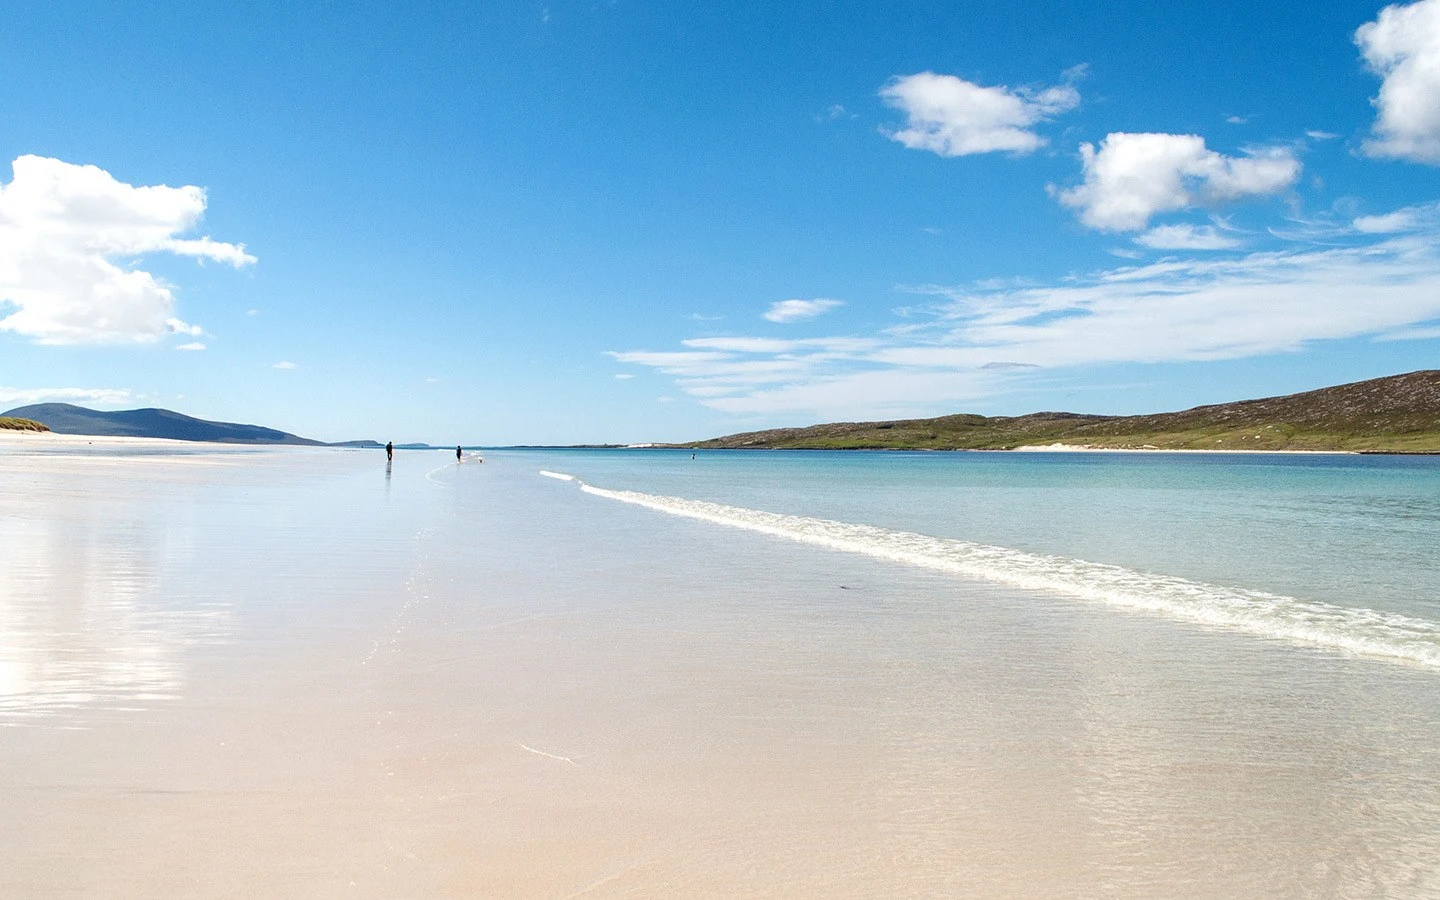 The stunning white sands of Luskentyre Beach on the Isle of Harris, Outer Hebrides